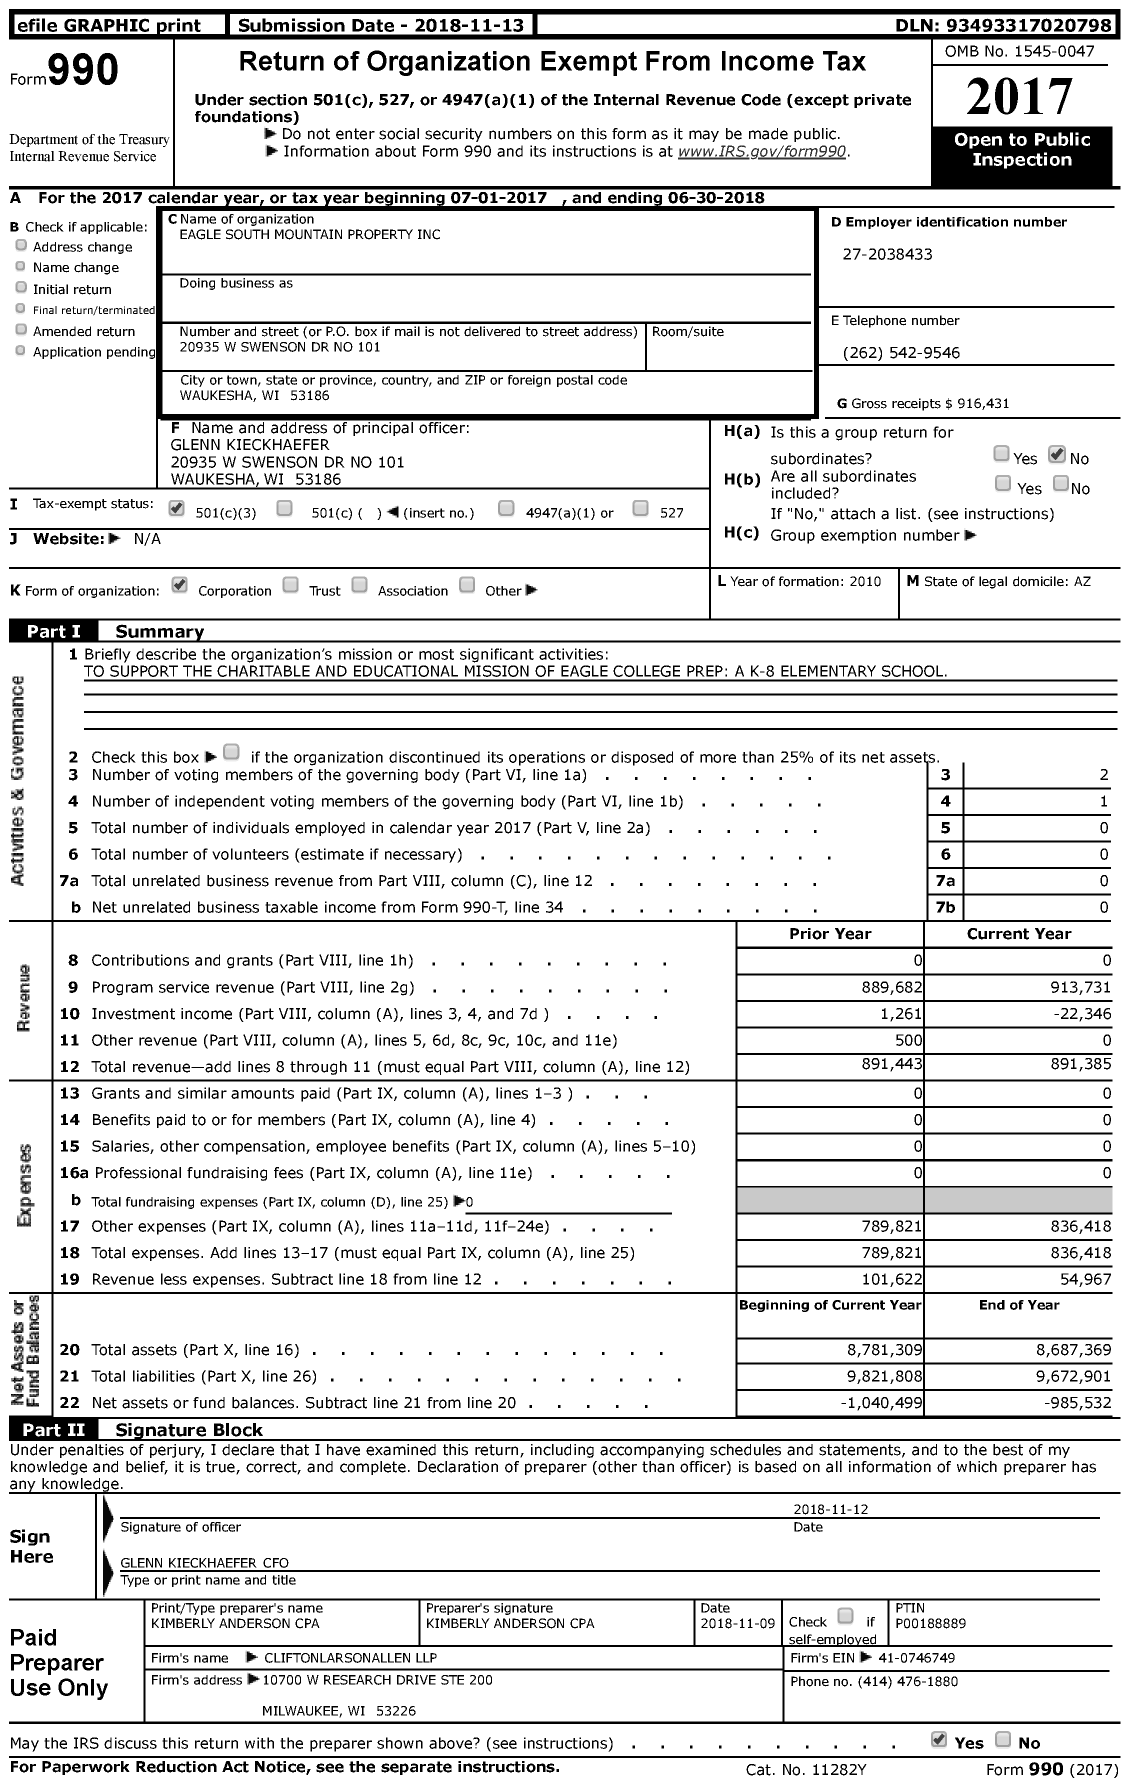 Image of first page of 2017 Form 990 for Eagle South Mountain Property